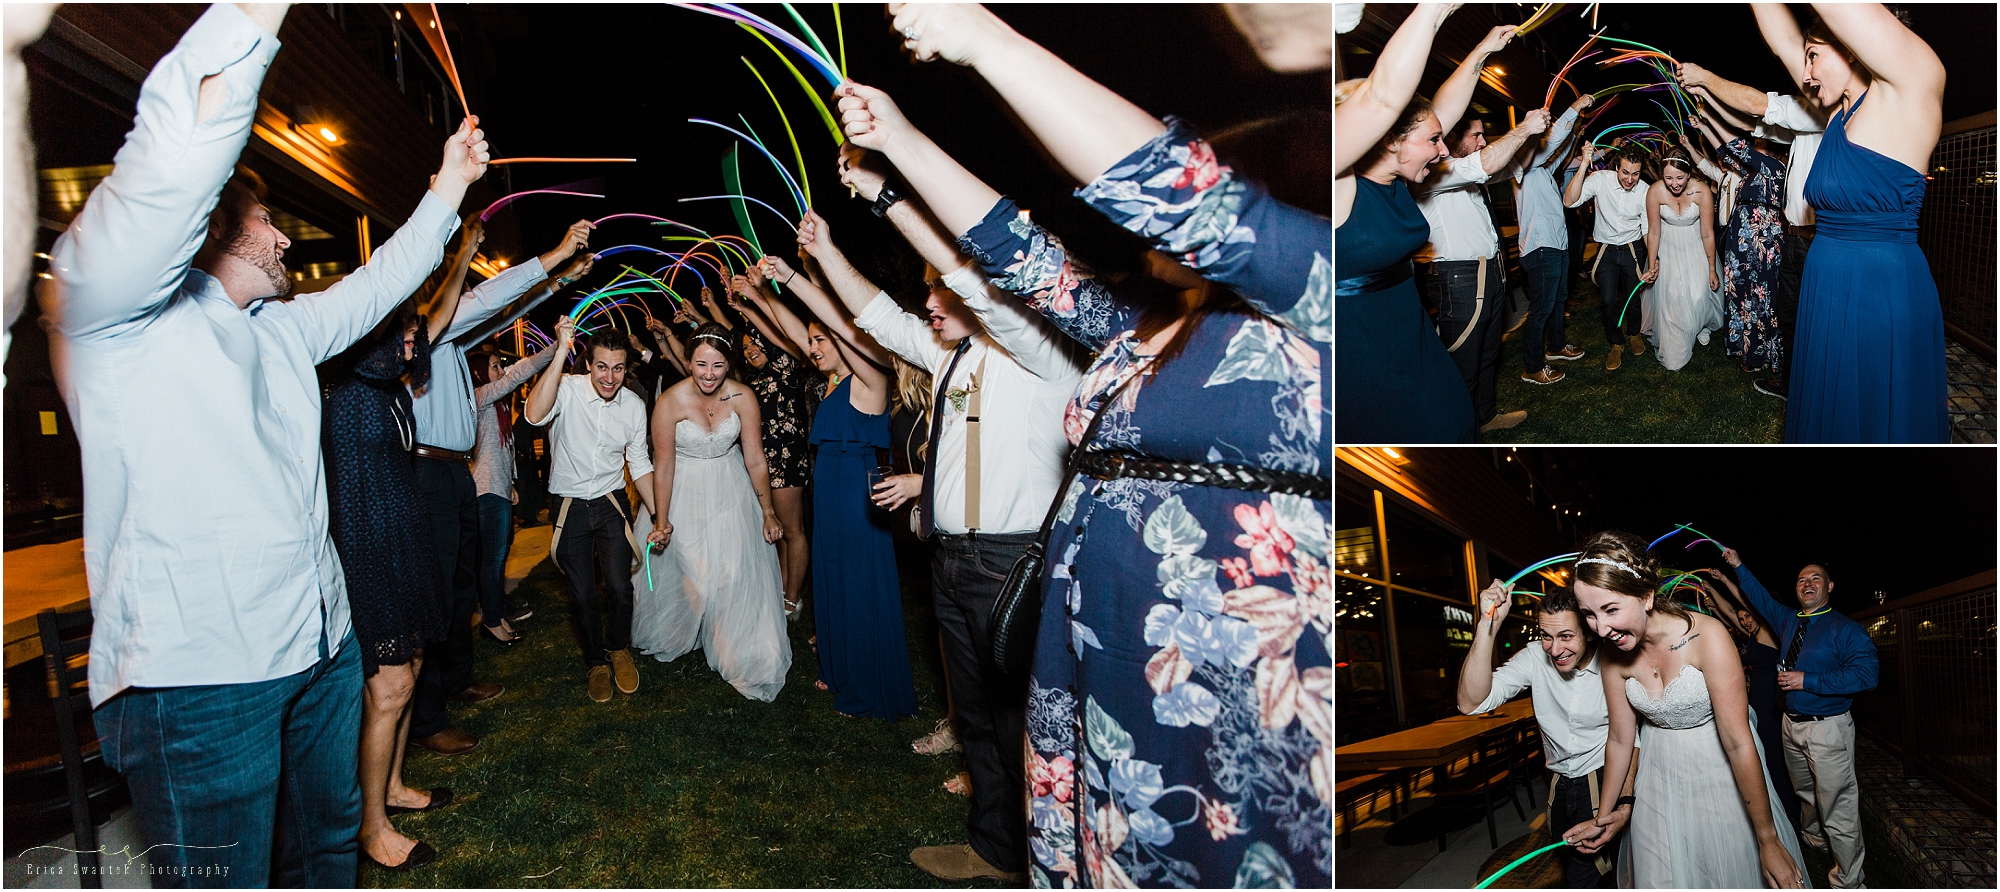 The guests all lined up for glow stick send off at this Worthy Brewing Wedding in Bend Oregon. | Erica Swantek Photography